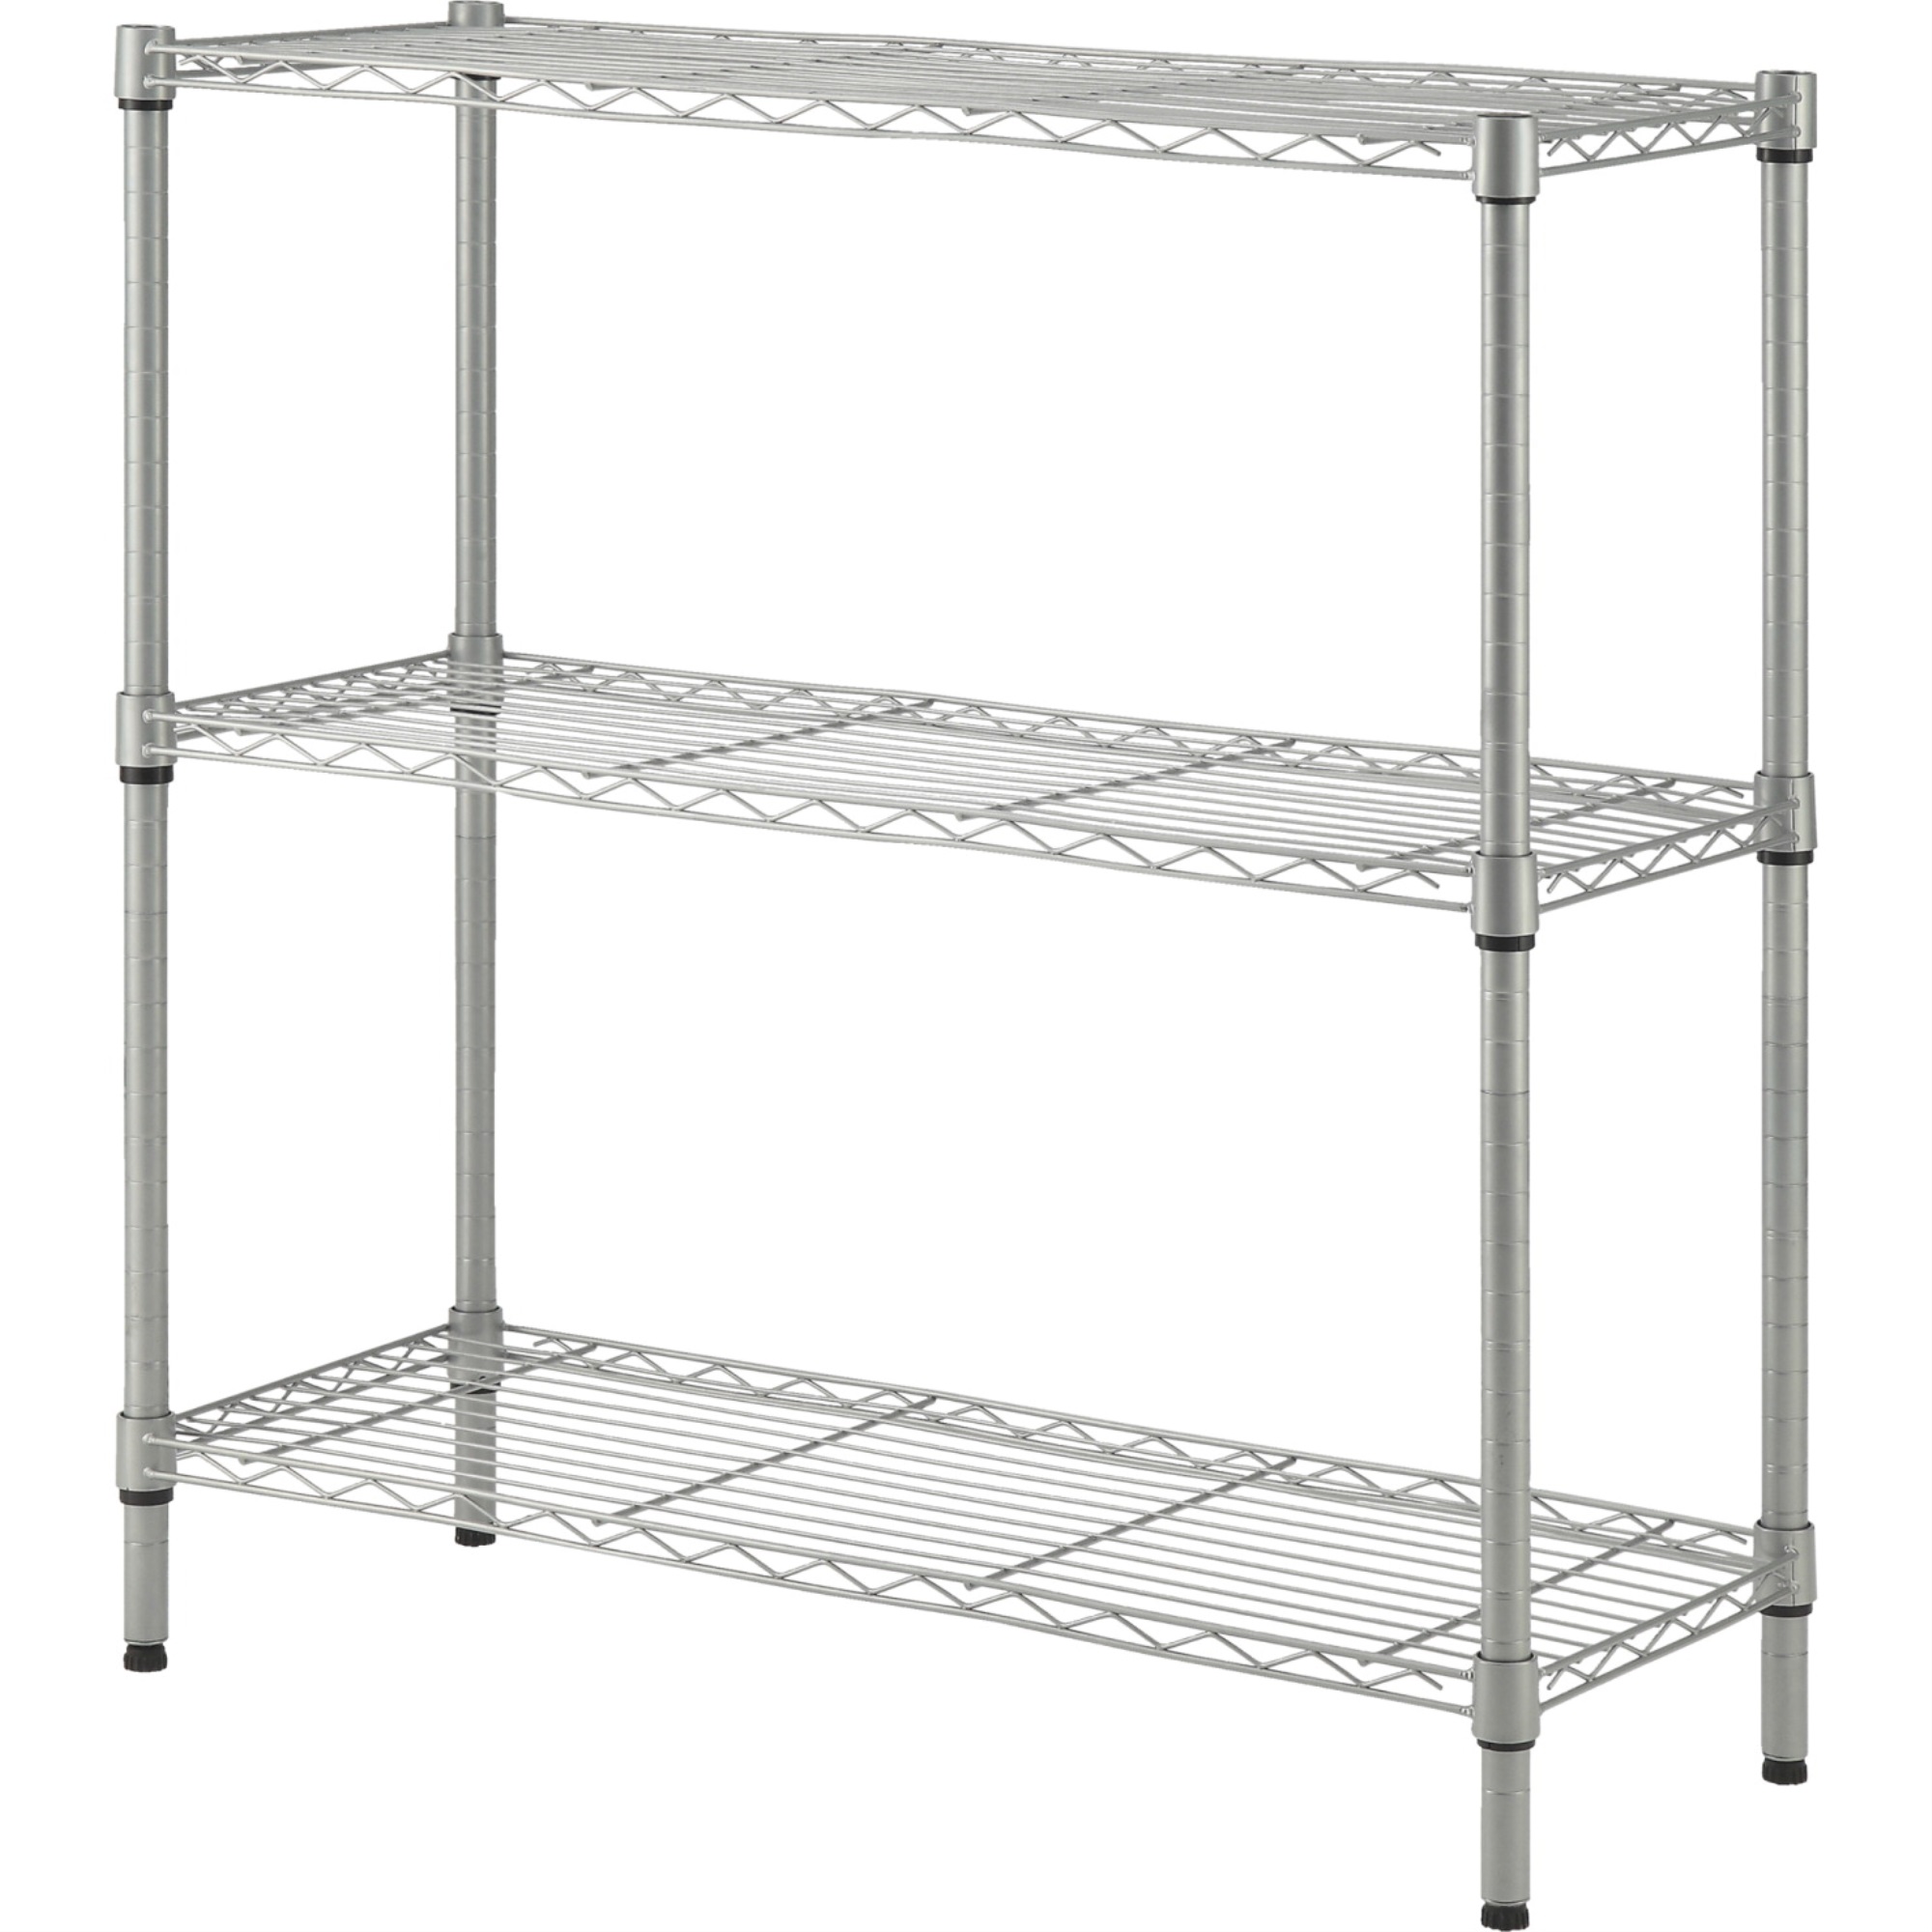 Lorell Light-Duty Wire Shelving, 36 x 14 x 36 Inches, Silver